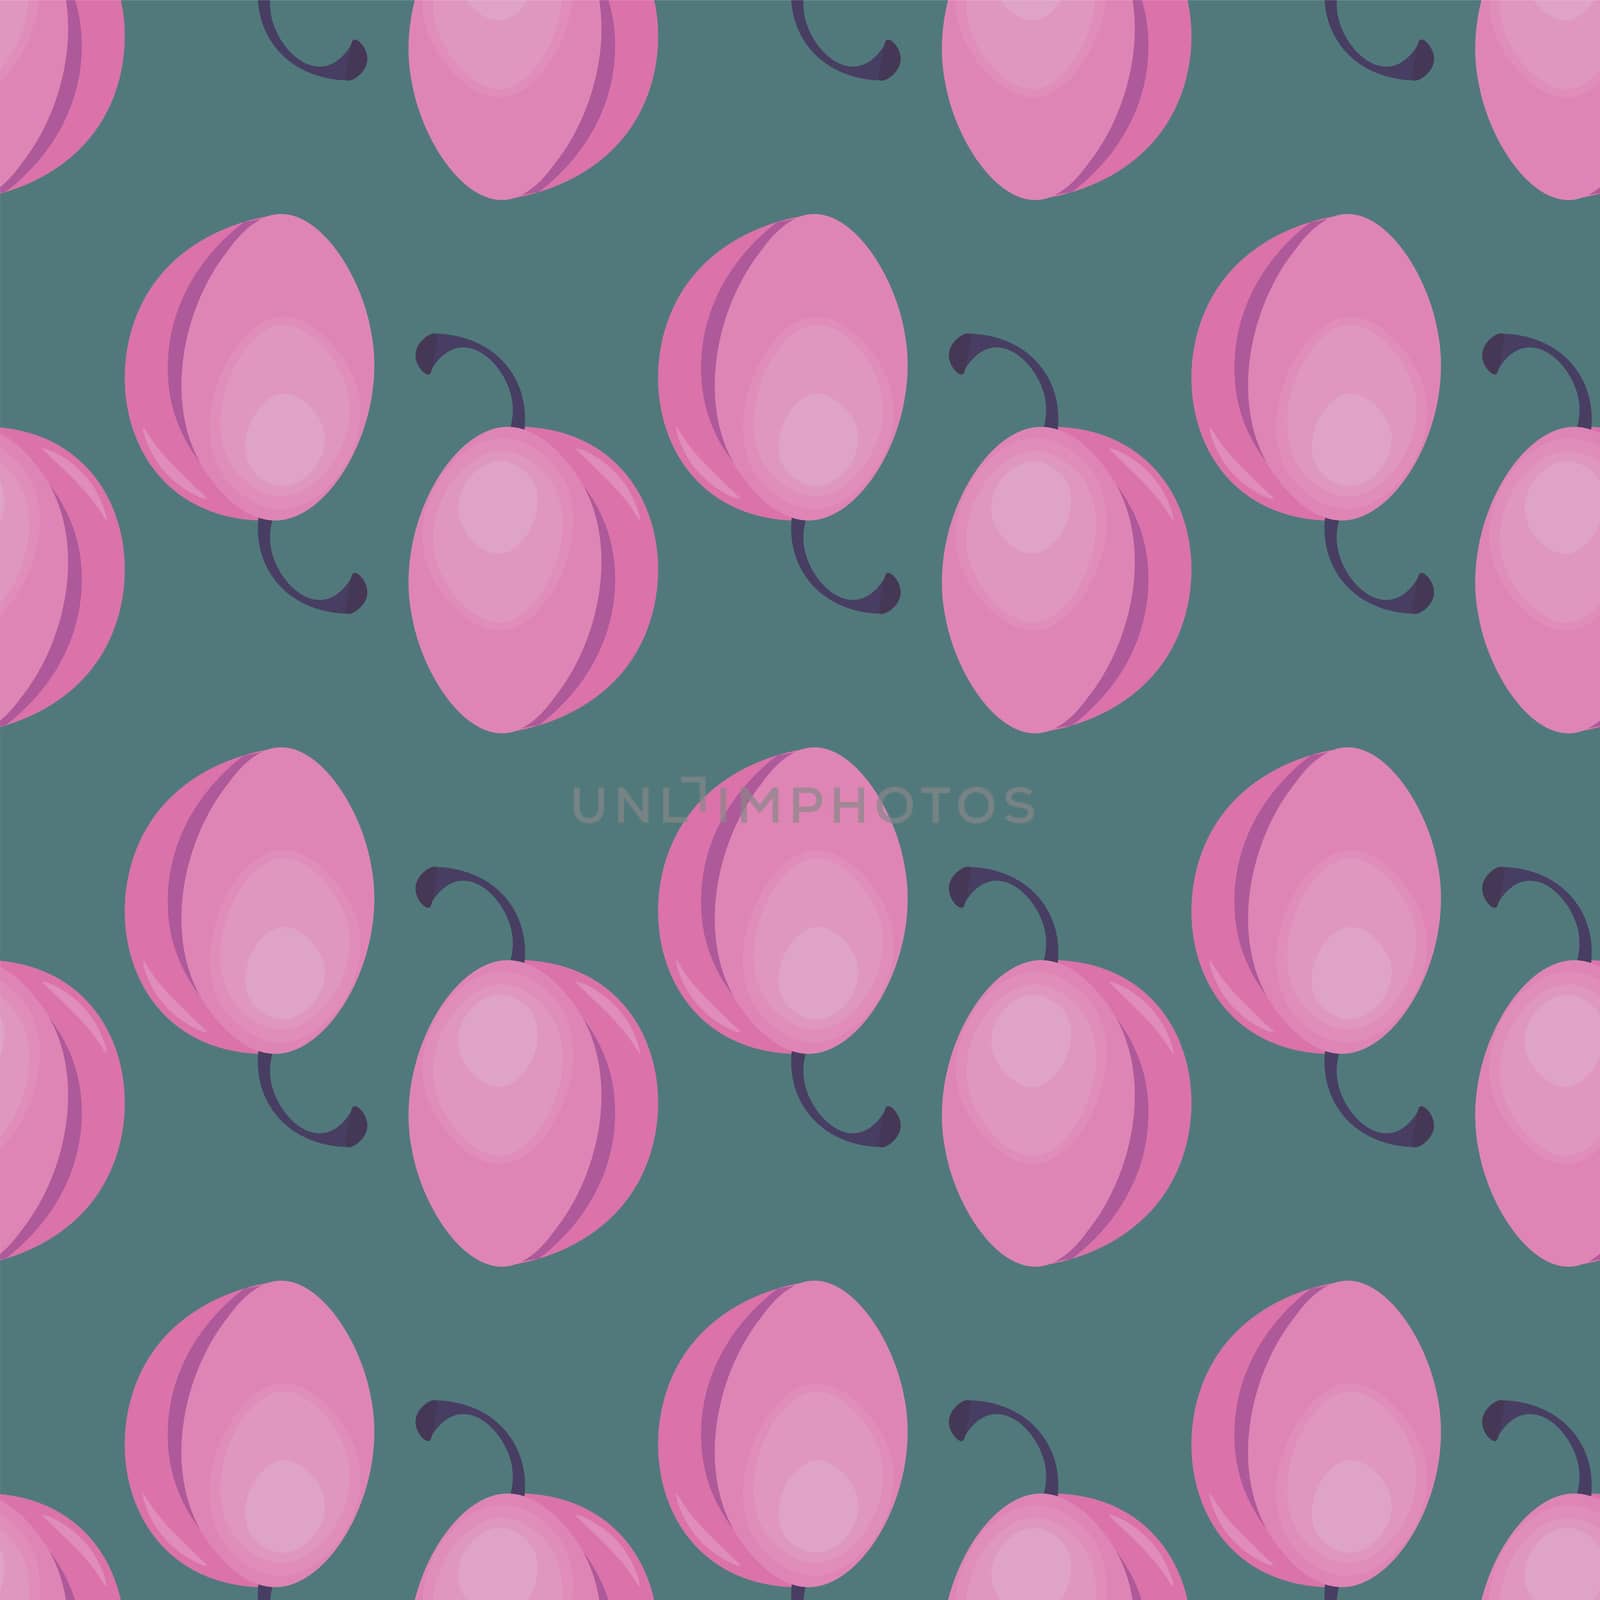 Plums pattern , illustration, vector on white background